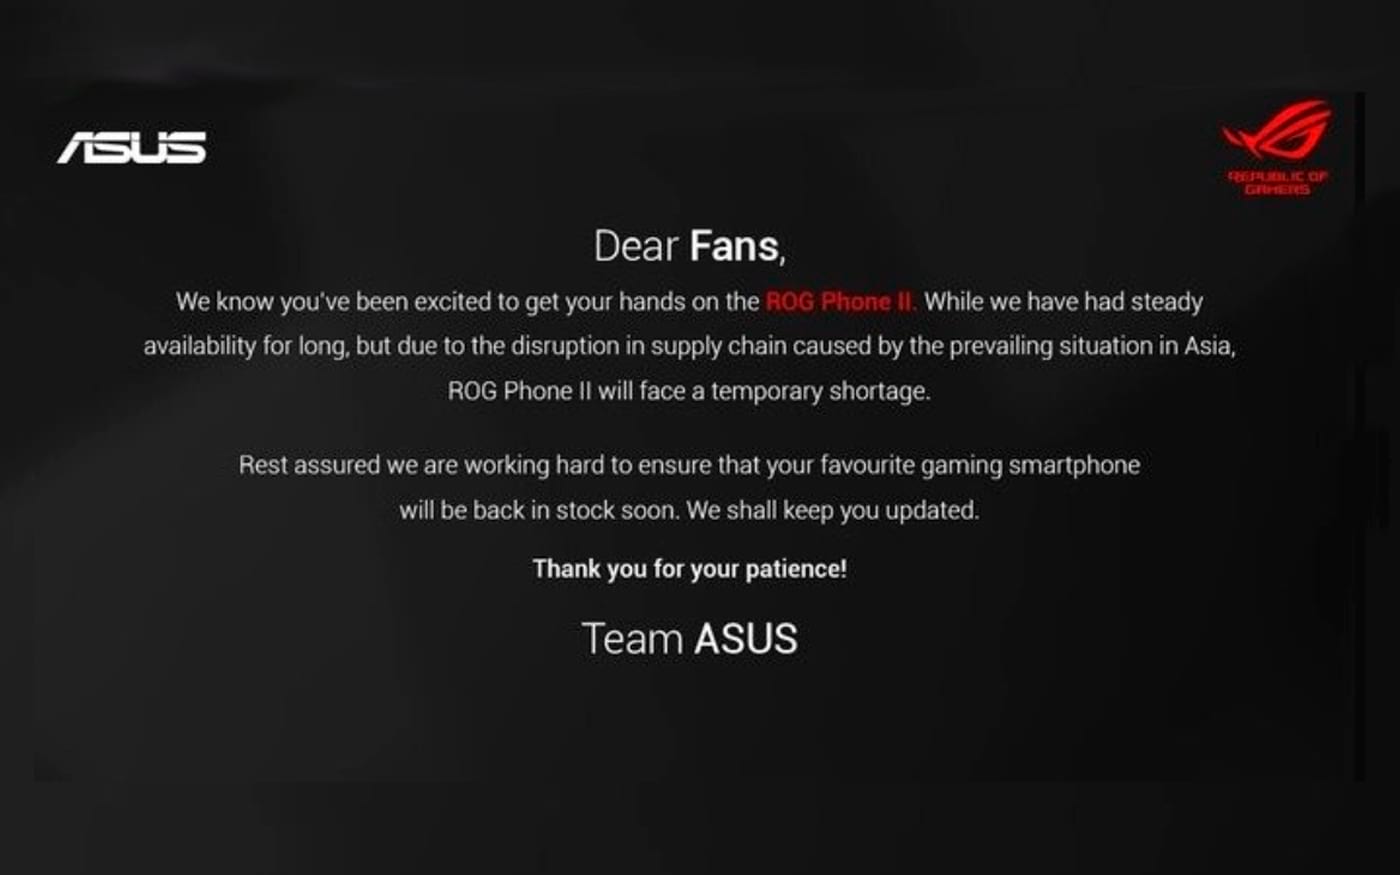 Asus India issues note stating that ROG Phone 2 is temporarily sold out